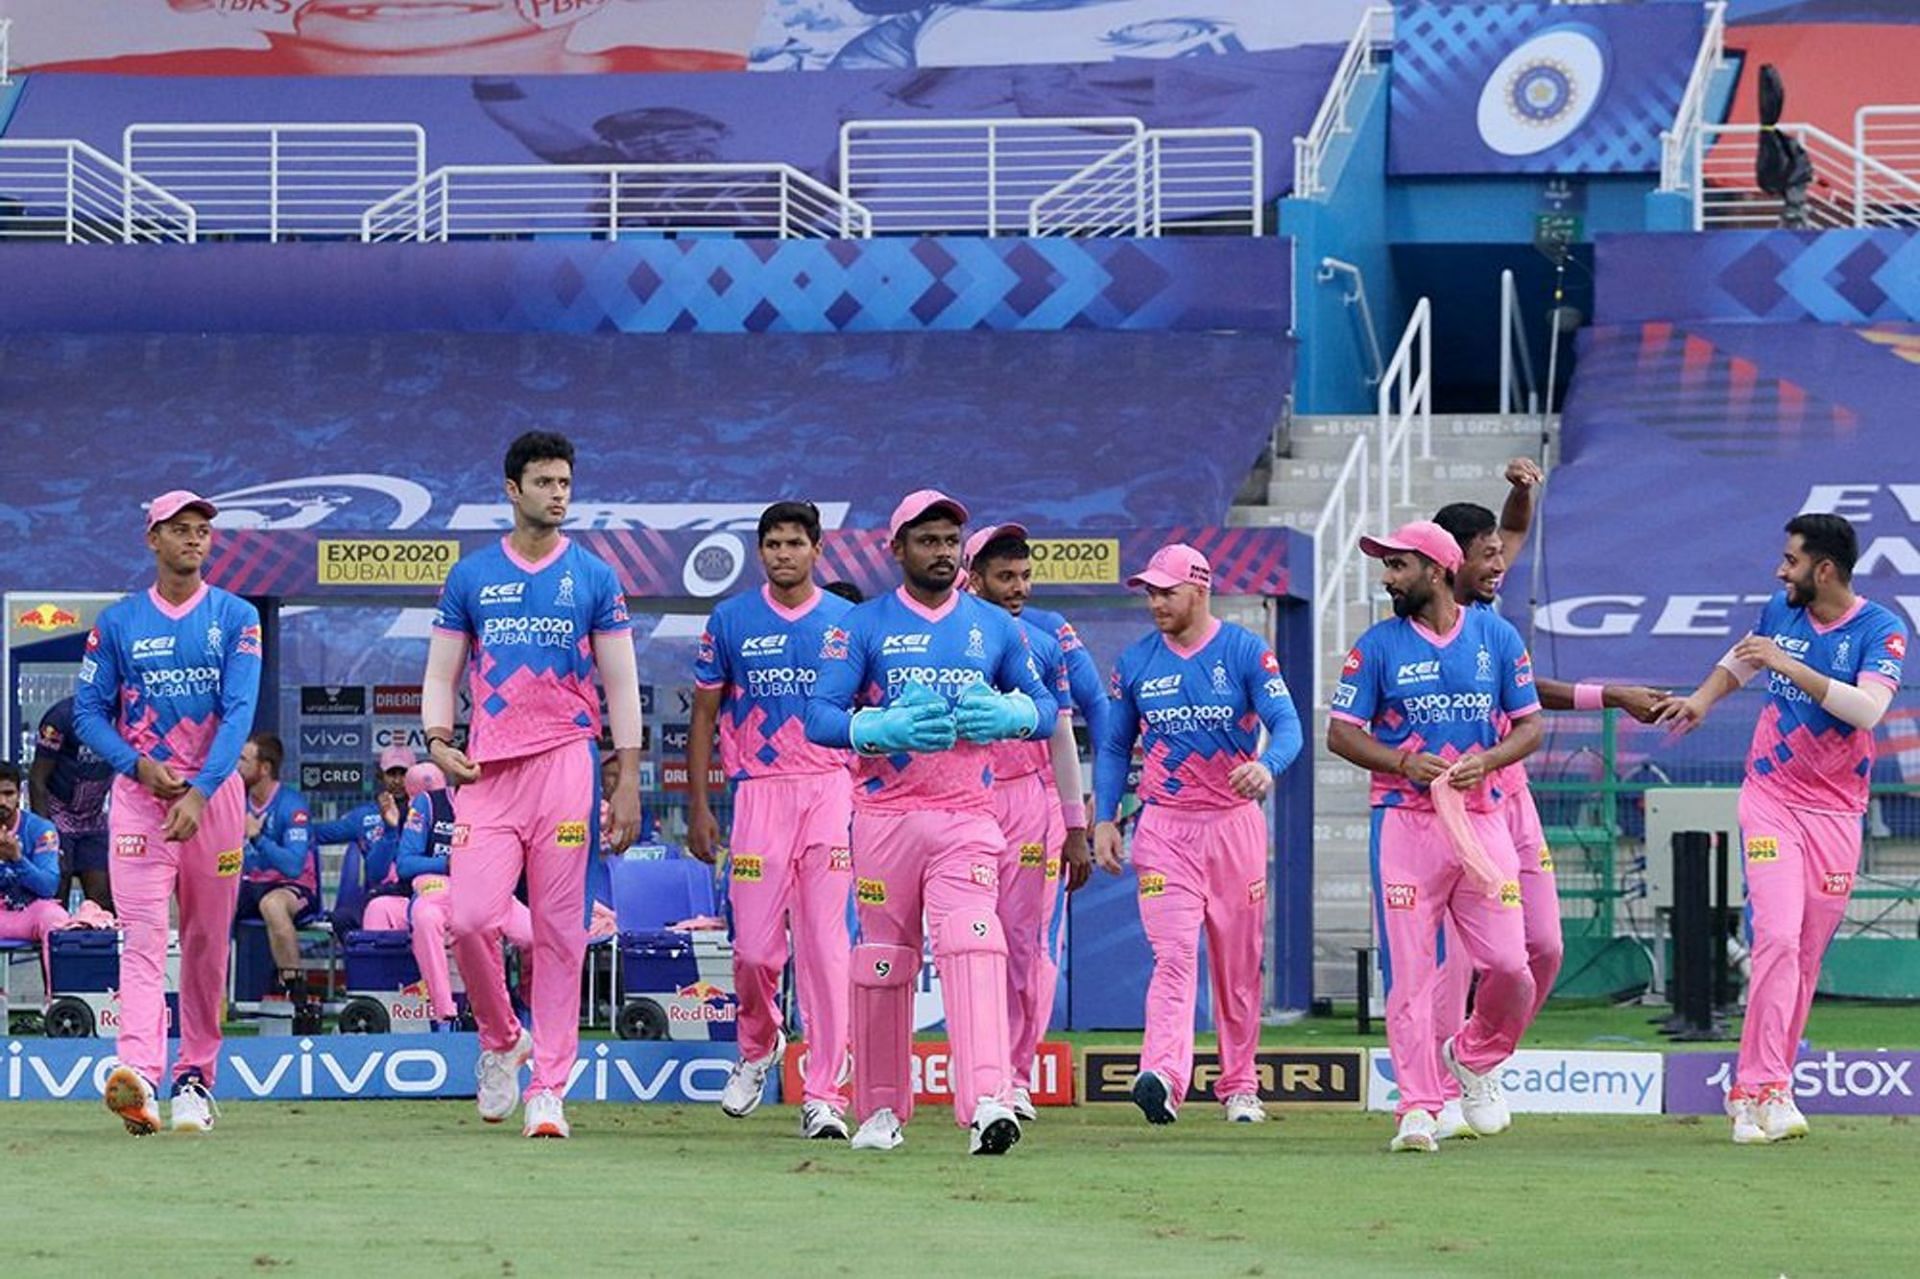 Another tough campaign saw the Rajasthan Royals (RR) finish in 7th position at the end of the 2021 IPL season (Picture Credits - Vipin Pawar/Sportzpics/IPL)